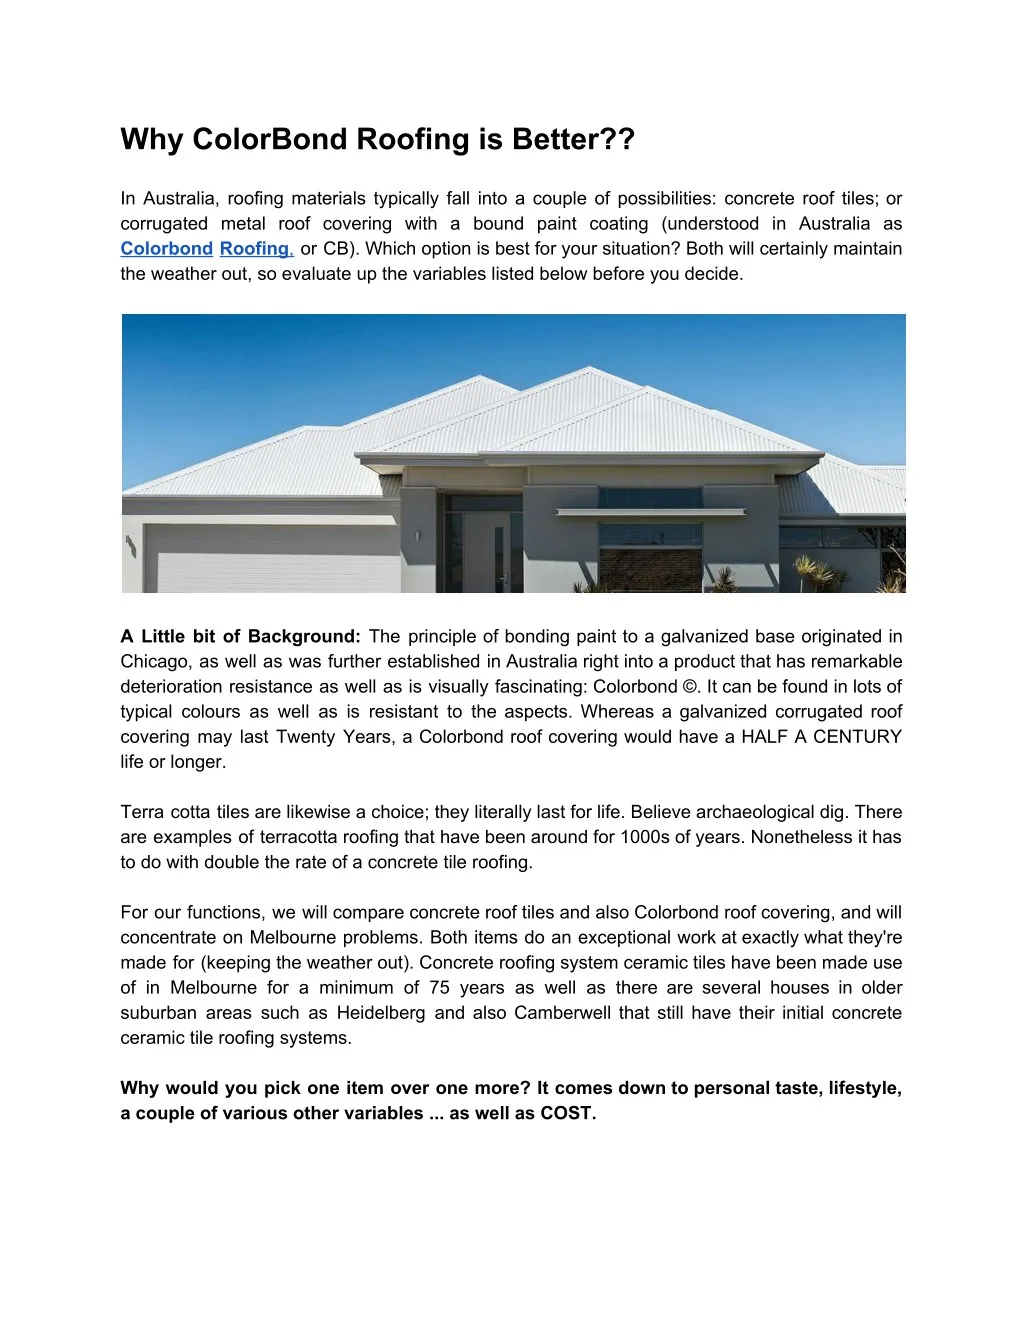 why colorbond roofing is better in australia